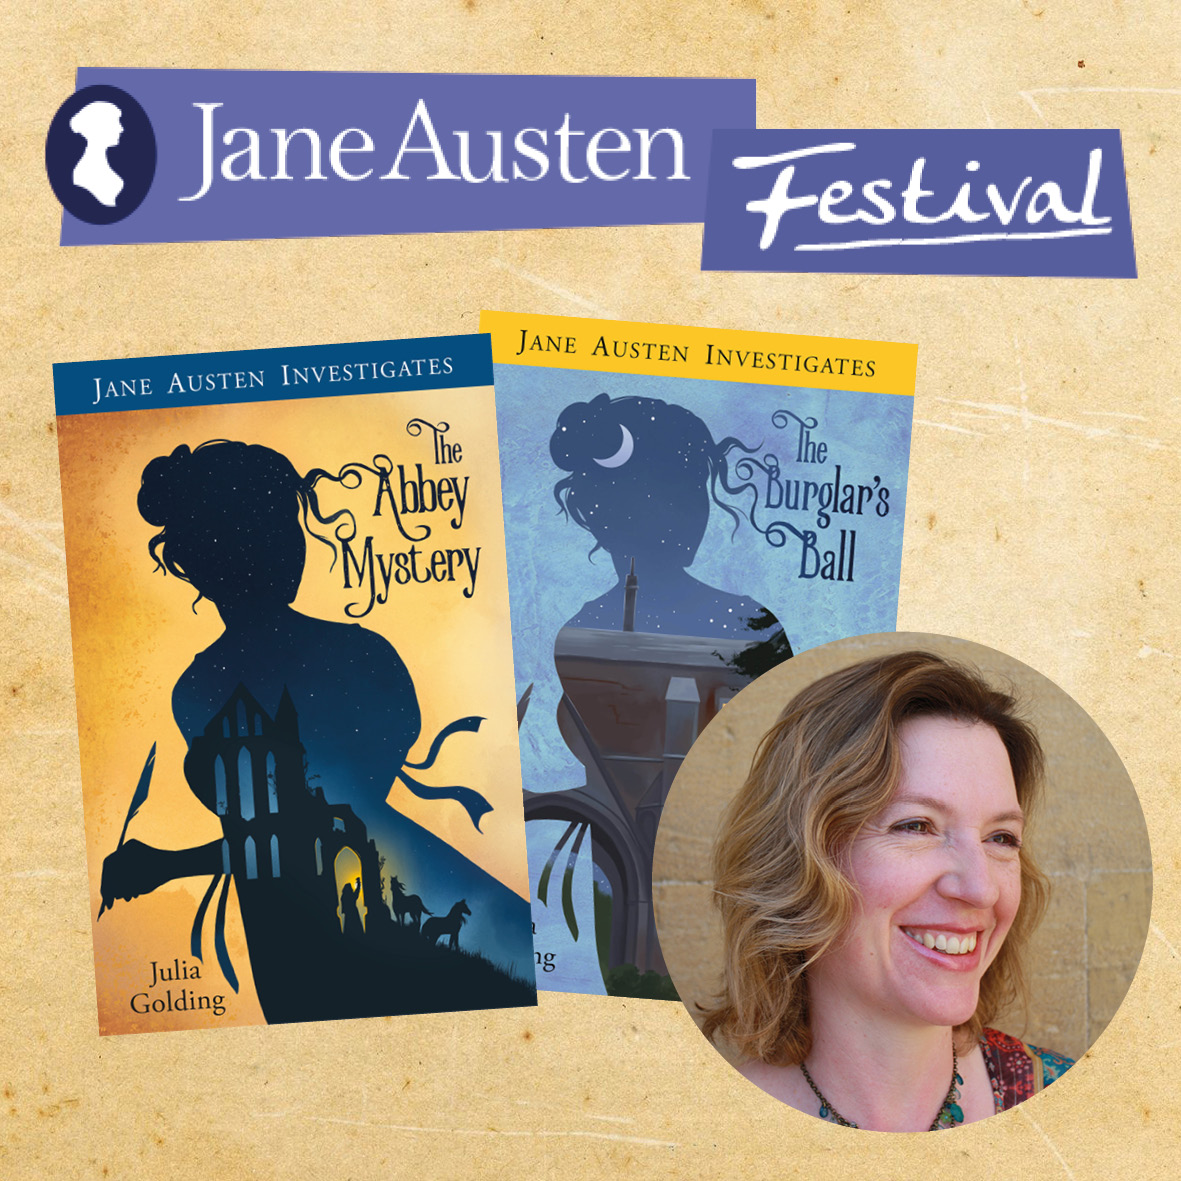 This Friday join Austen agony aunts, @jgoldingauthor and partner-in-podcast @ZoeWheddon at the Jane Austen Festival in Bath for some 18th century perspectives on 21st century problems! Tickets available here 👇 janeaustenfestivalbath.co.uk/events/what-wo… #JaneAusten #JaneAustenFestival